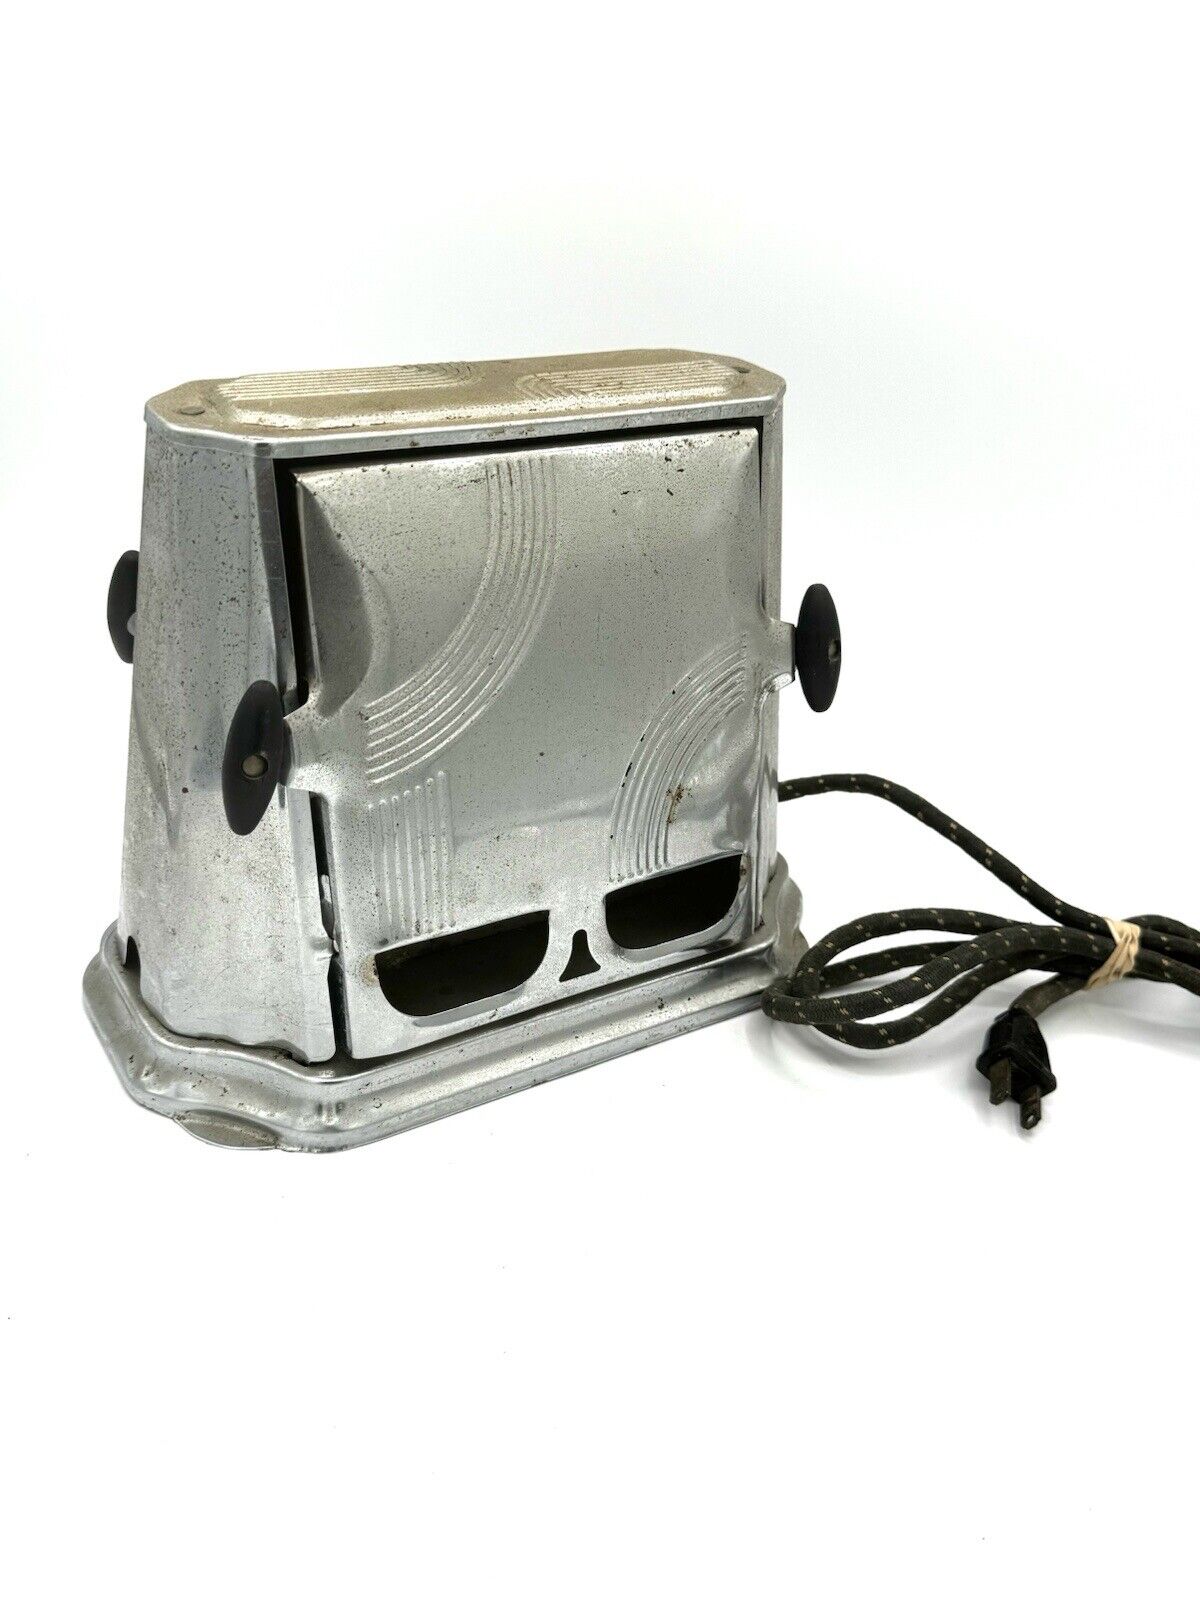 Vintage Art Deco Son Chief Series 680 Chrome 2 Slice Electric Toaster